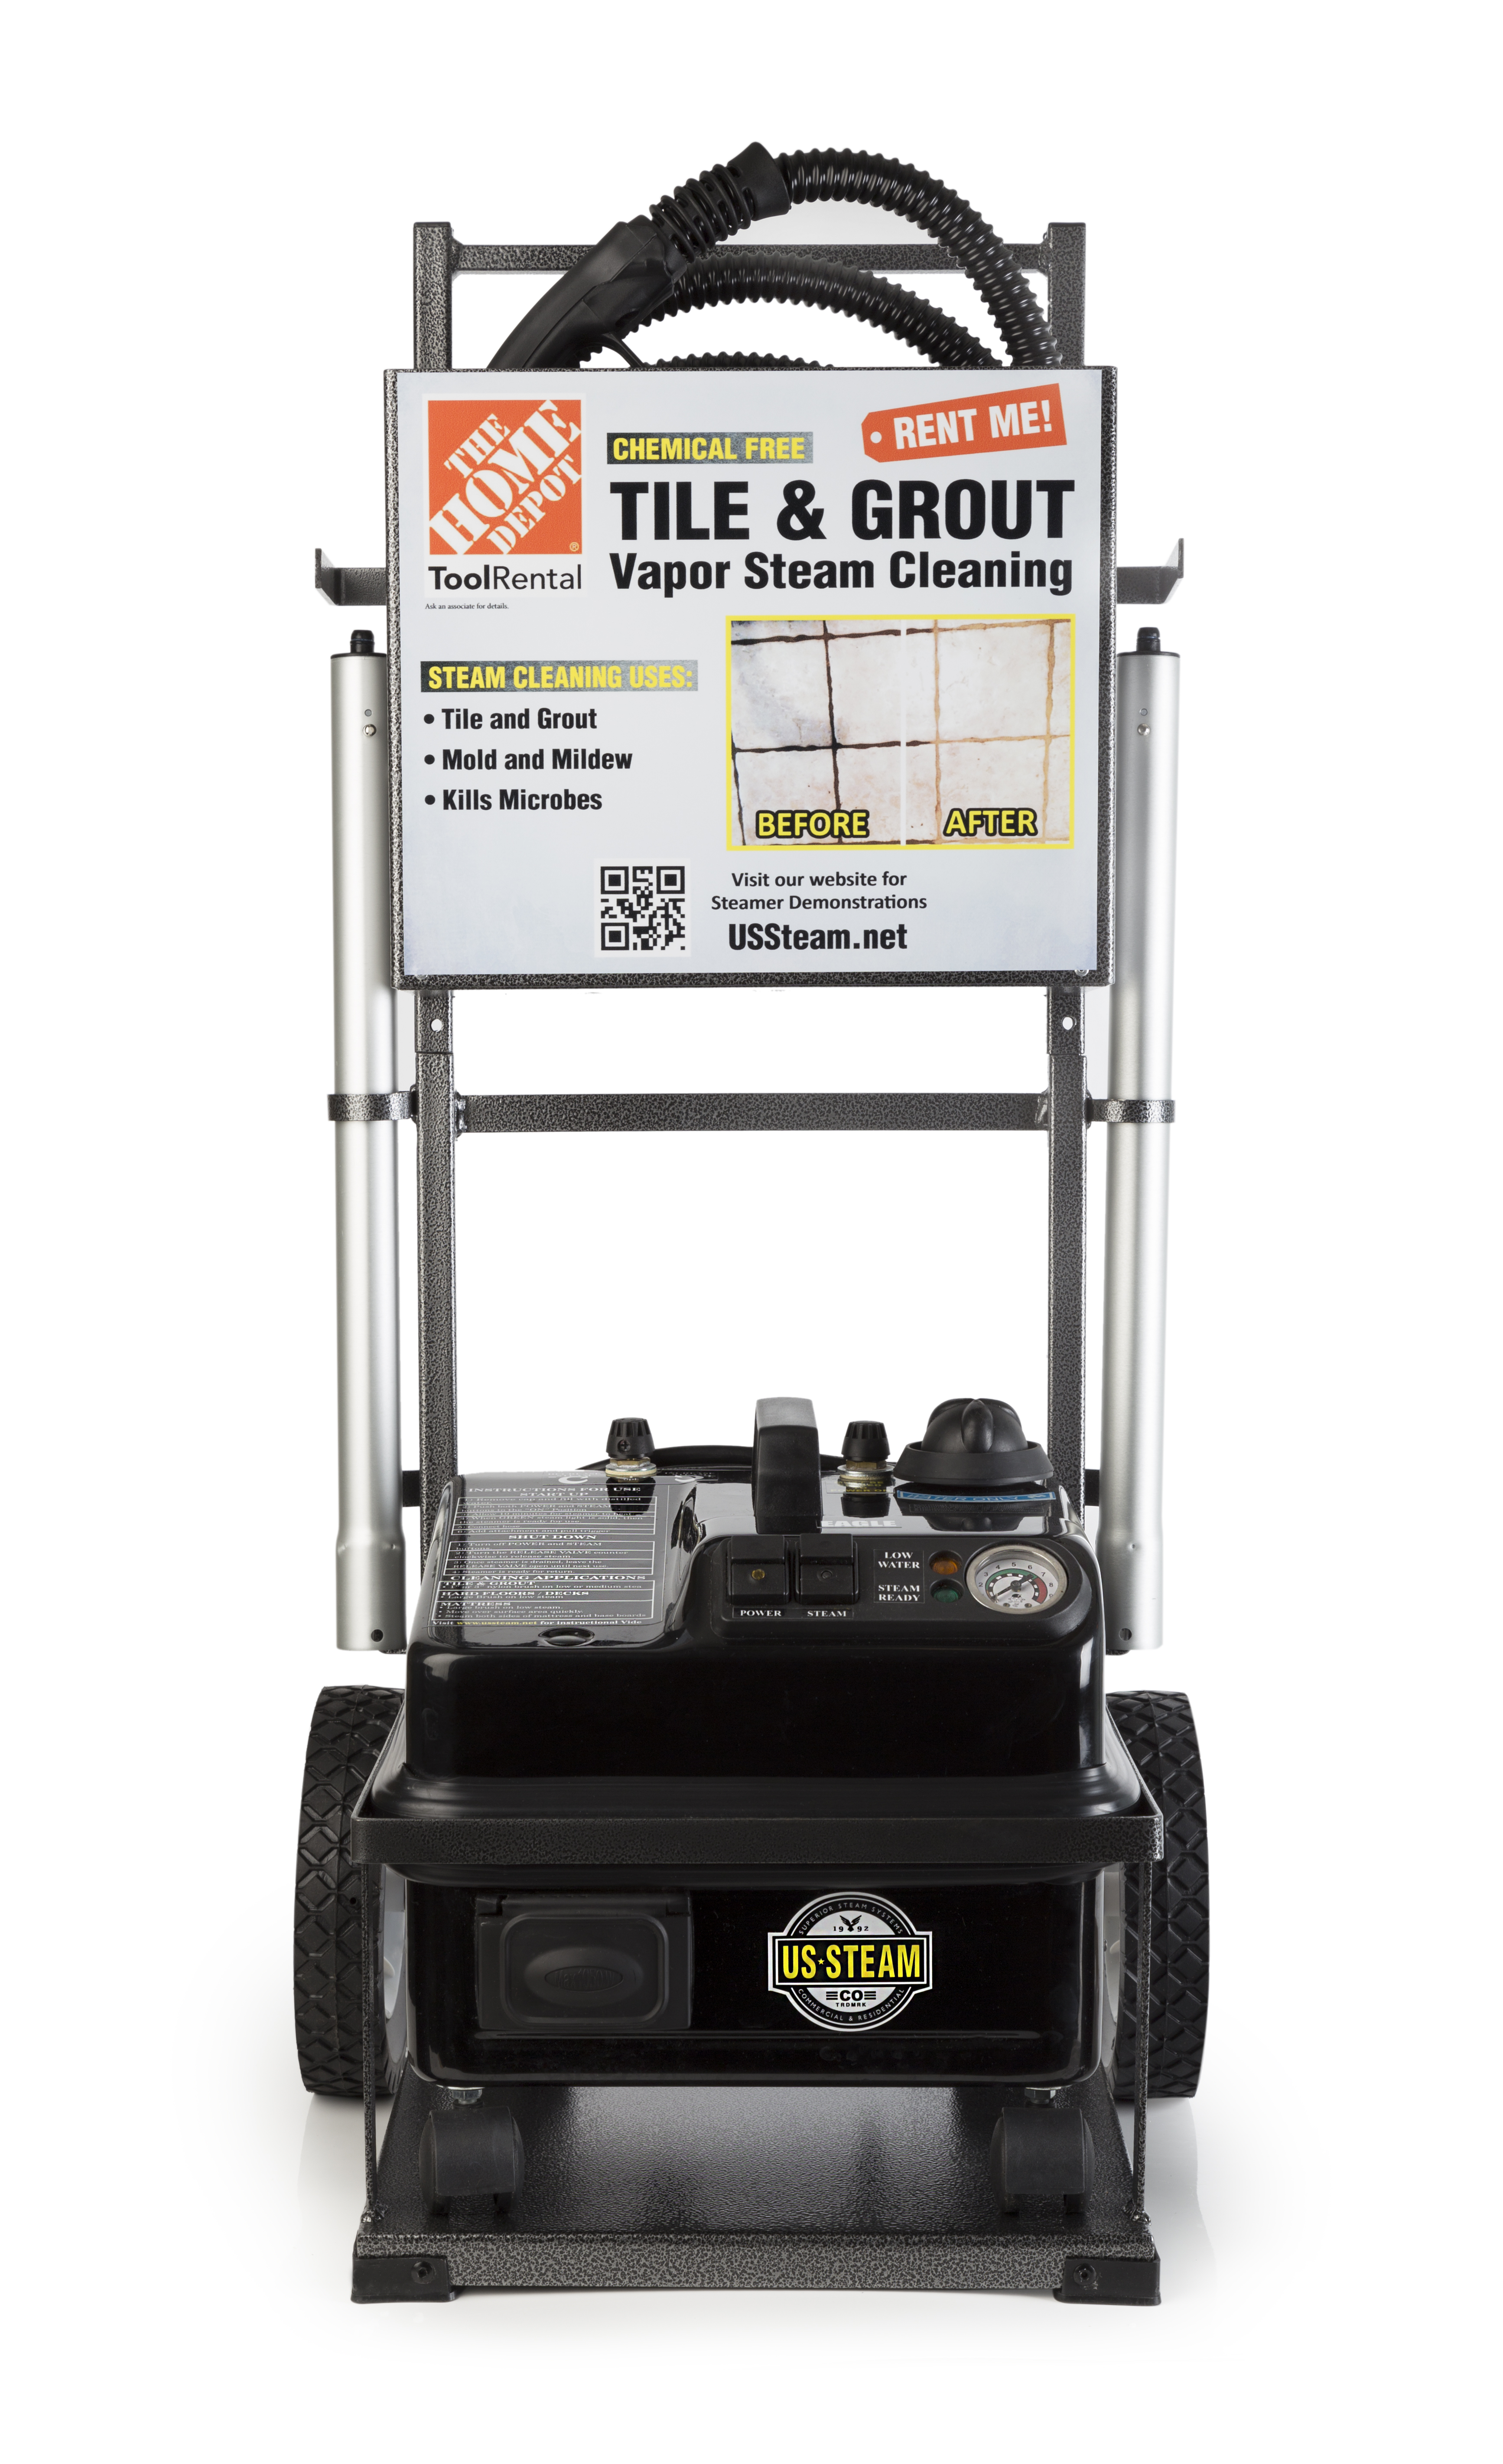 Tile and Grout Steam Cleaner